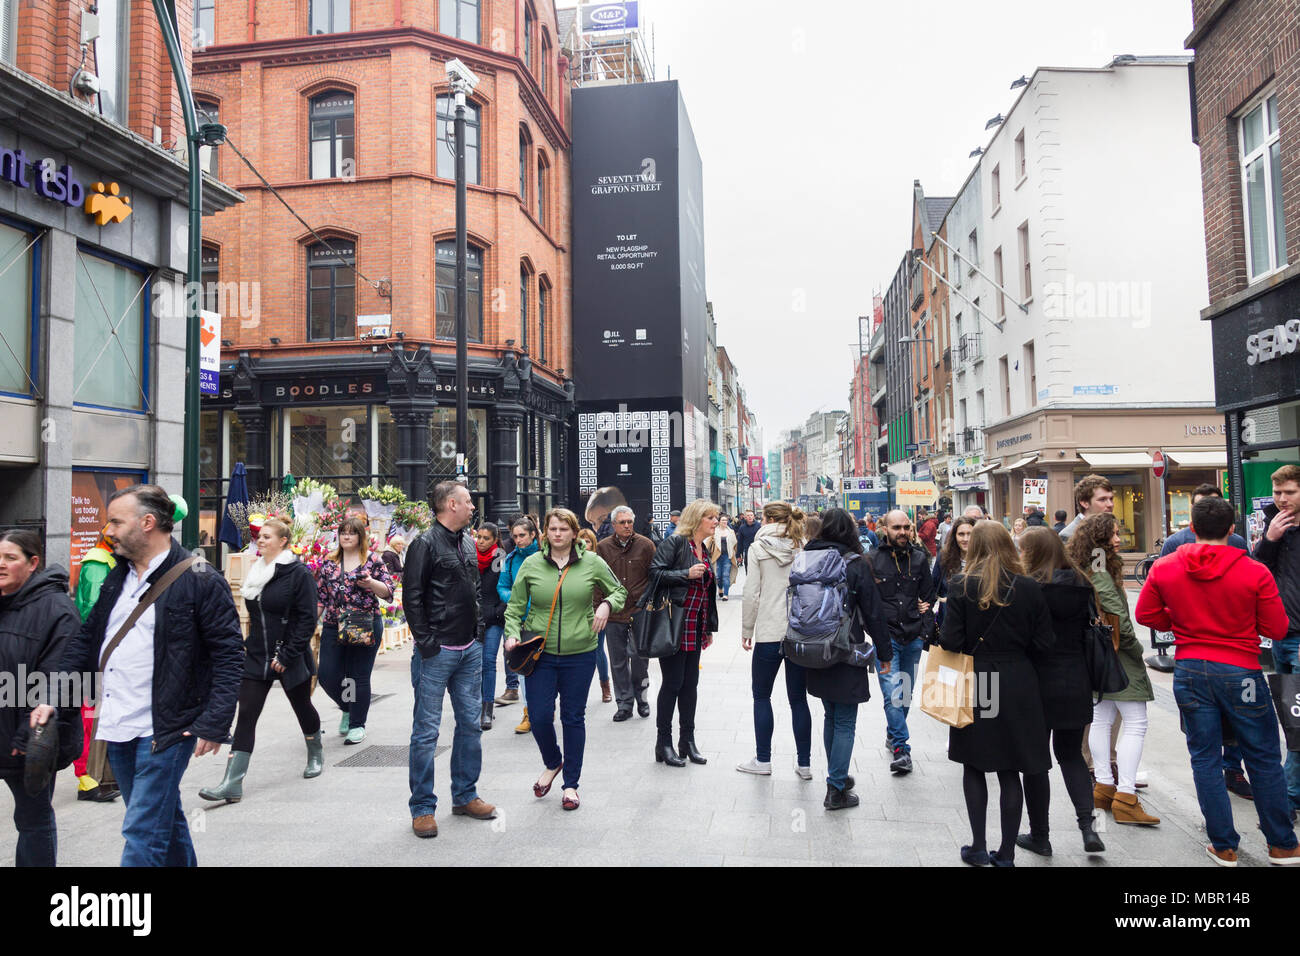 DUBLIN, IRELAND - 07 MAY, 2016: People walking on the Grafton Street. The main shopping street in the city is one of the most expensive in the world. Stock Photo